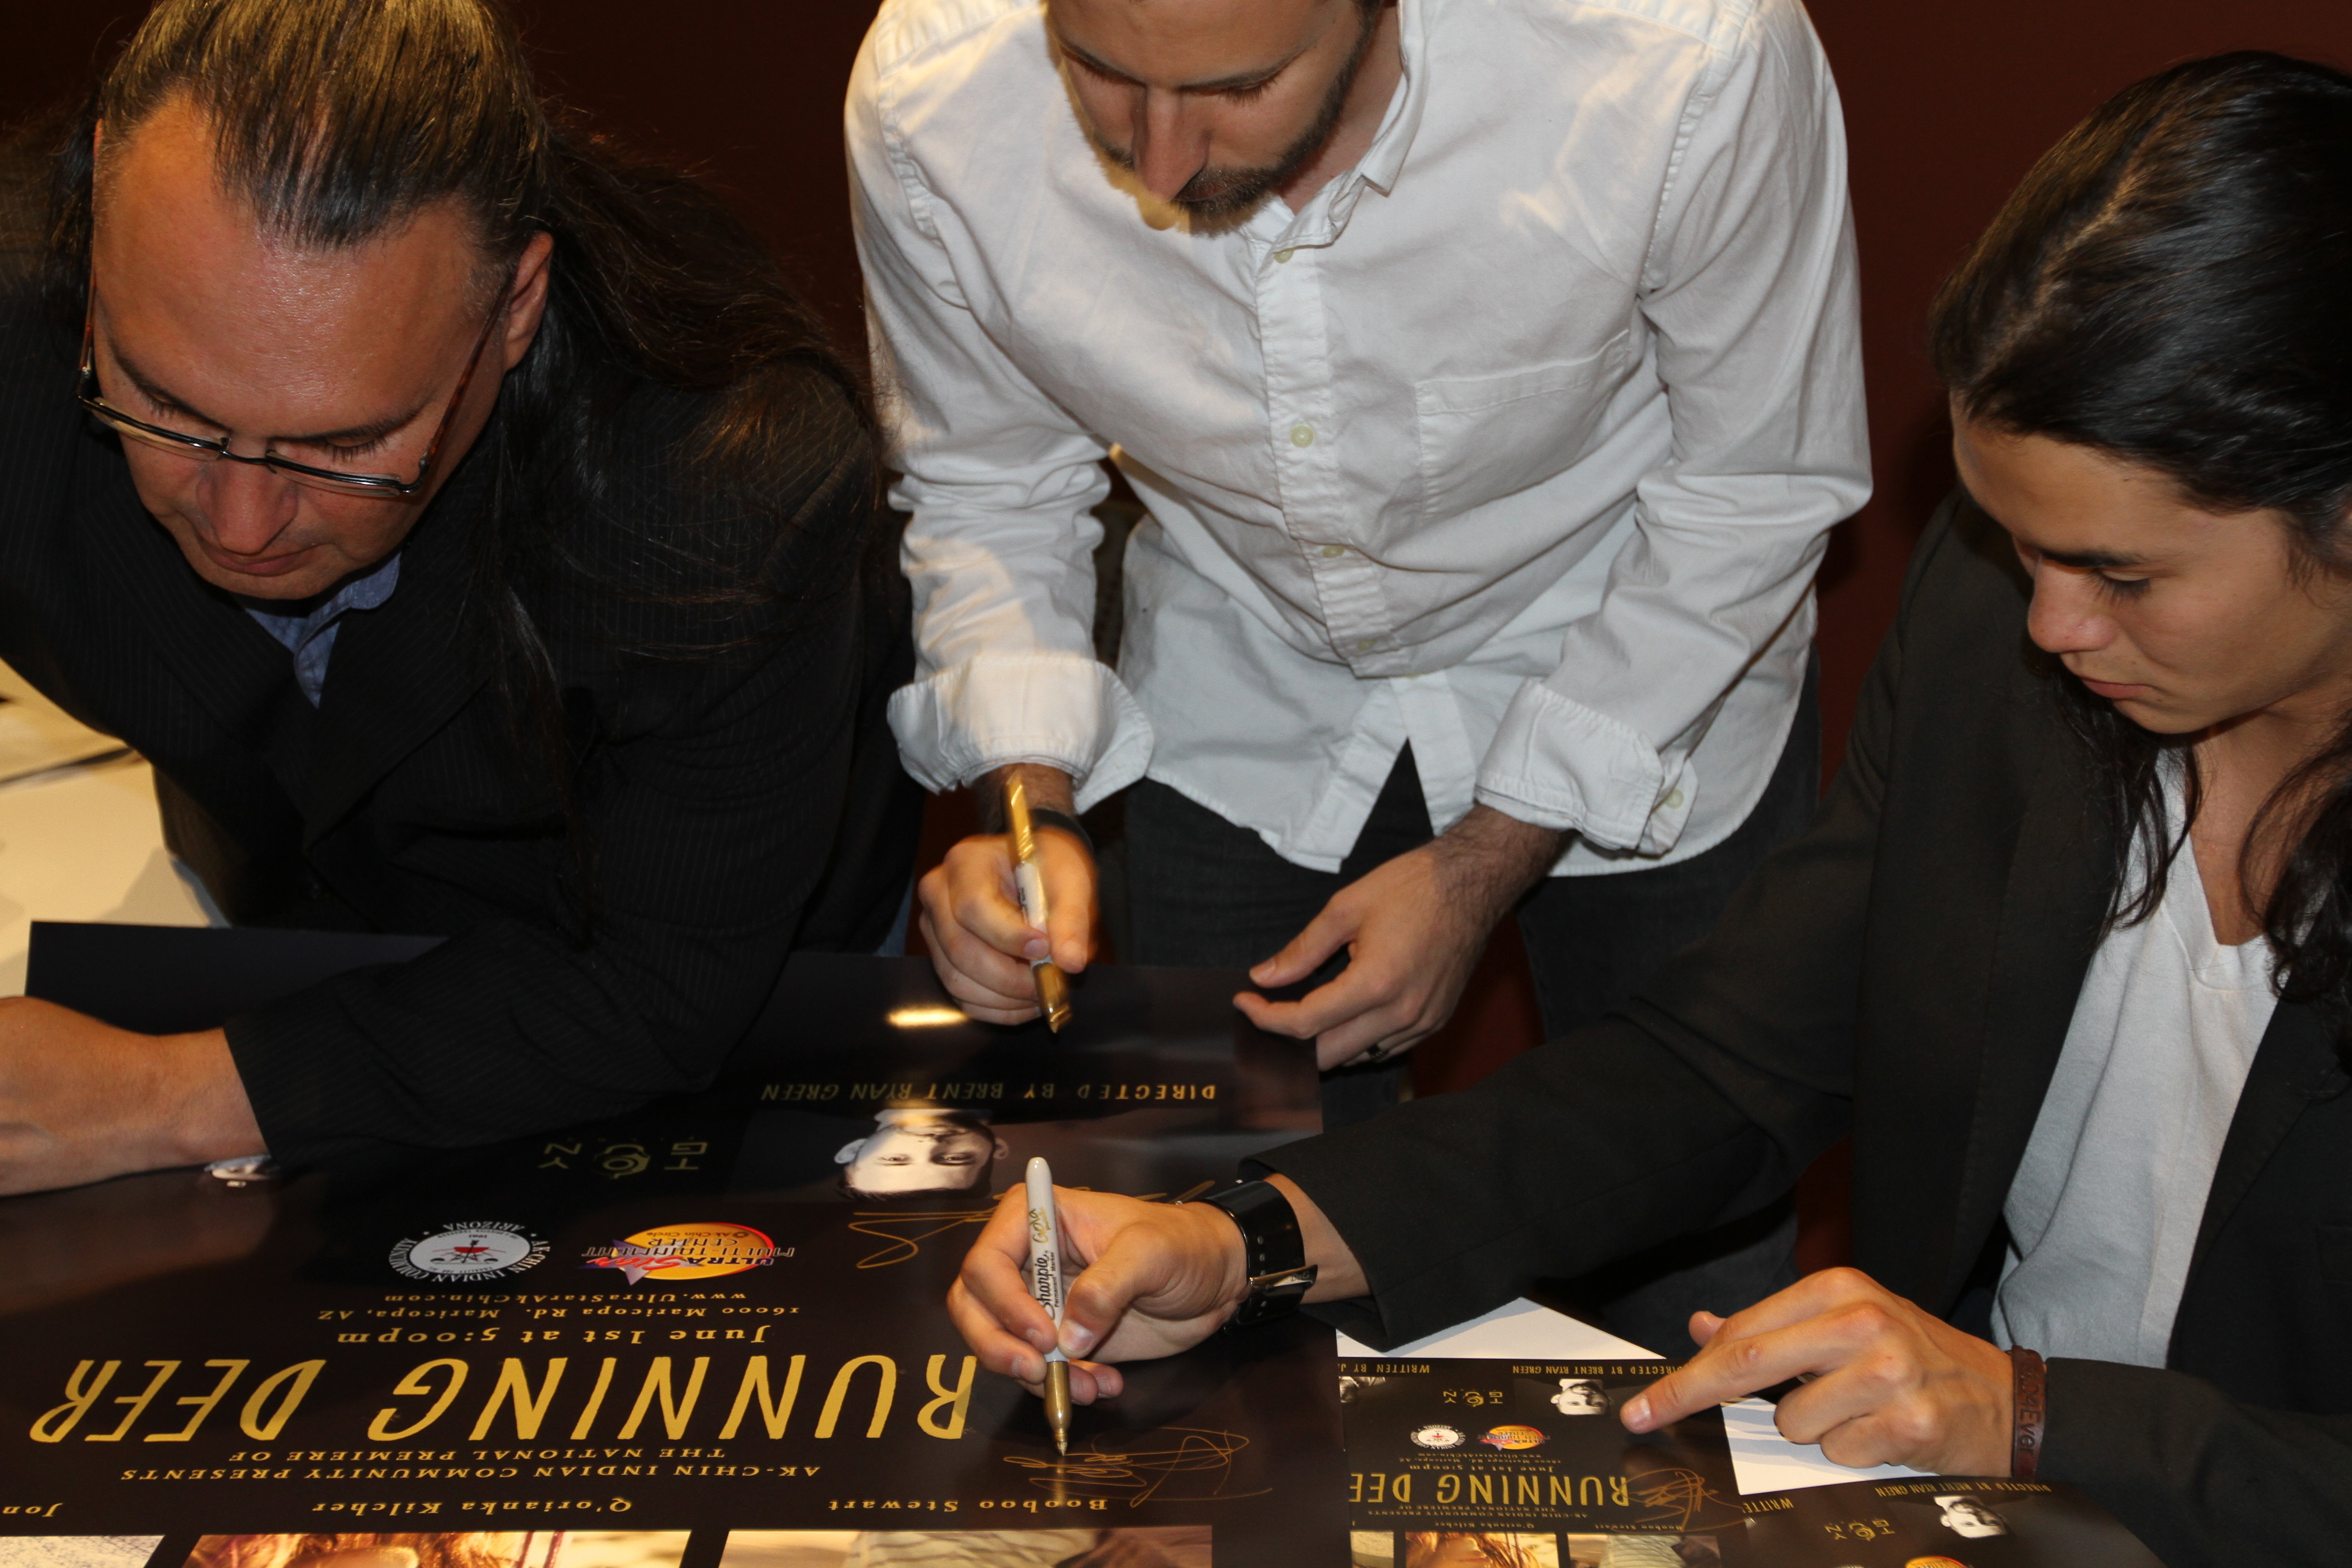 Jon Proudstar, Brent Ryan Green and Booboo Stewart autographing a poster following the premiere of Running Deer